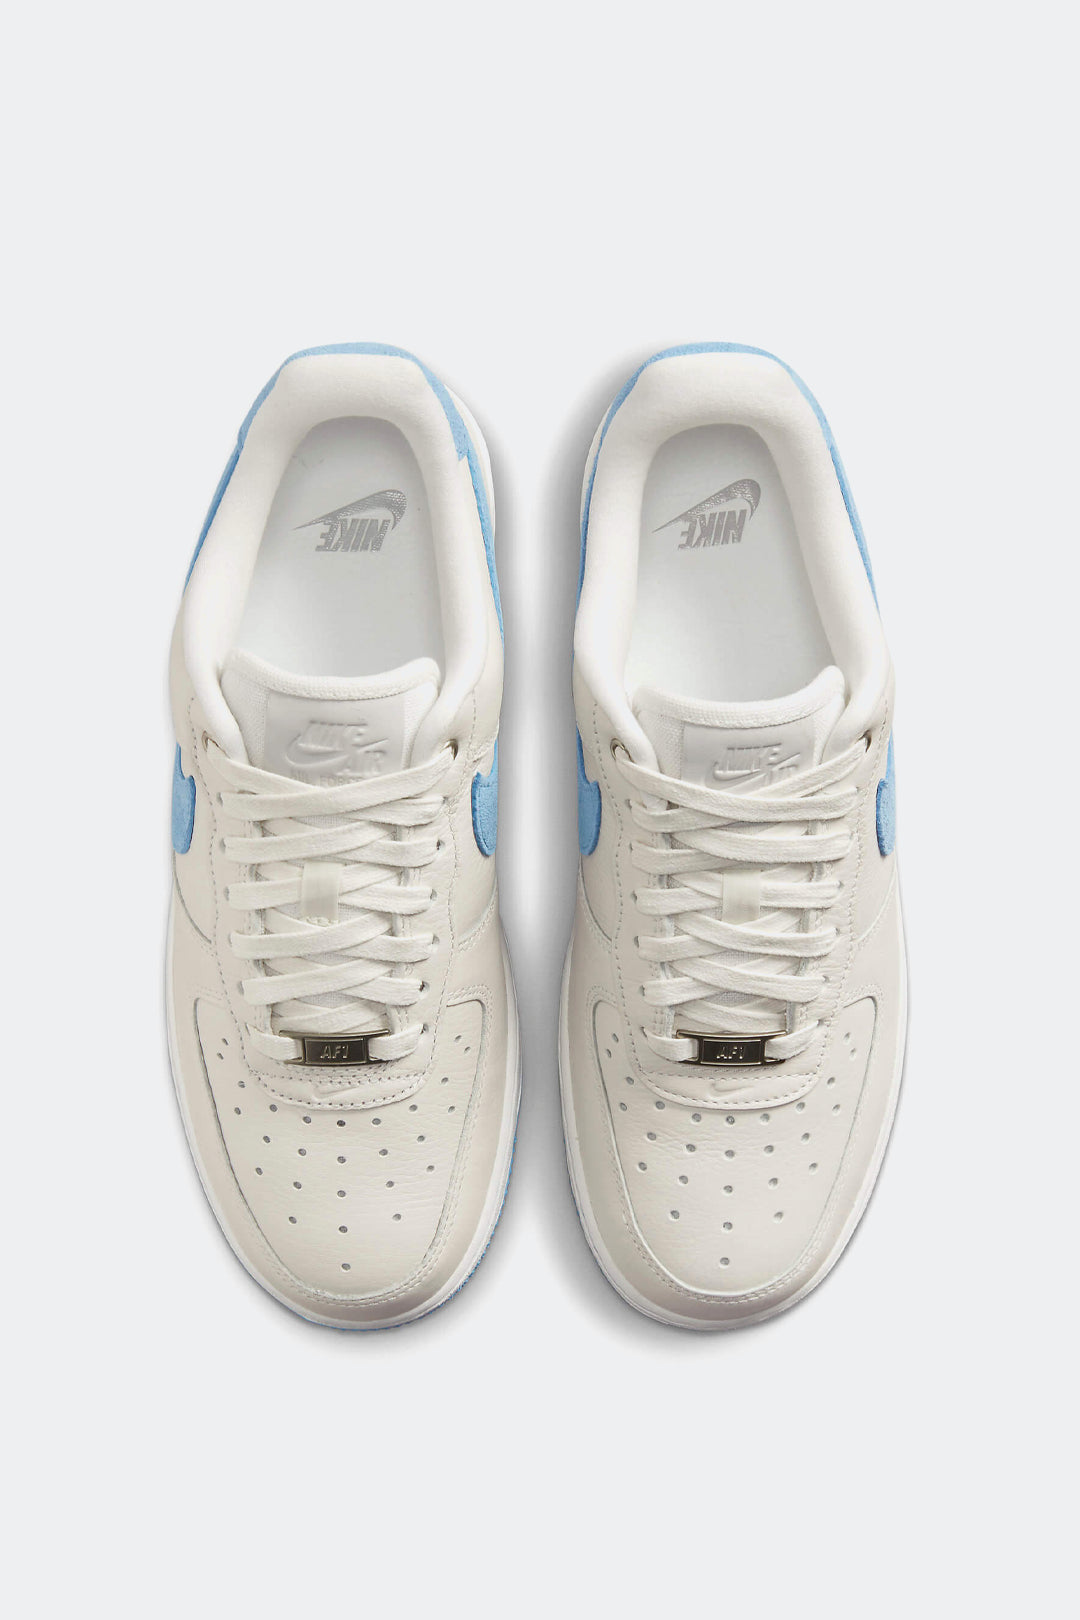 NIKE AIR FORCE 1 LOW LXX "UNIVERSITY BLUE" - MUJER - HYPE